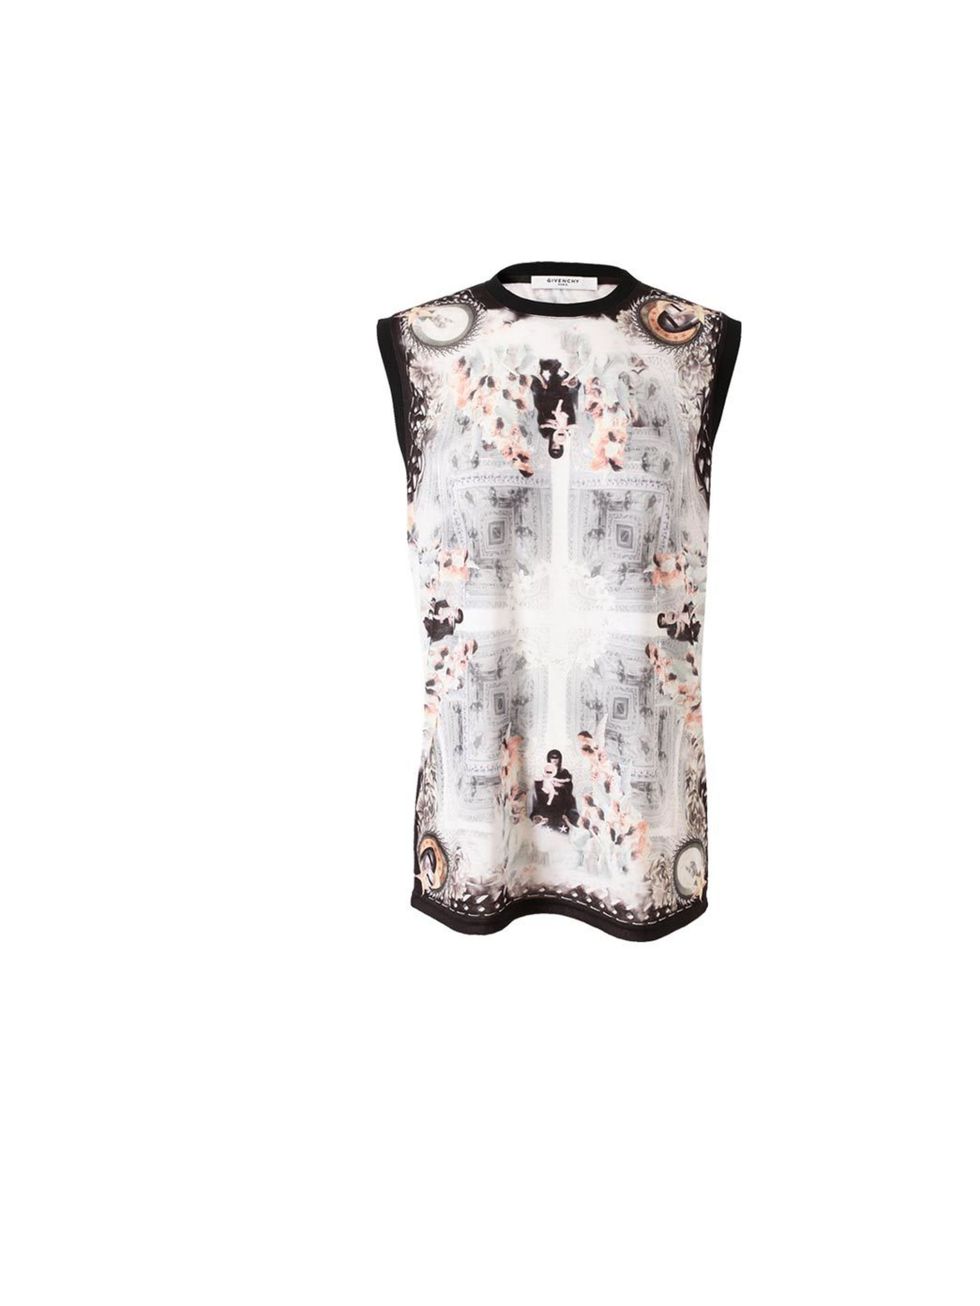 <p>Be a walking work of art with this Renaissance-print Givenchy T-shirt, £335, at <a href="http://www.brownsfashion.com/product/014O25680006/029/renaissance-printed-stretchjersey-tank">Browns Fashion</a></p>